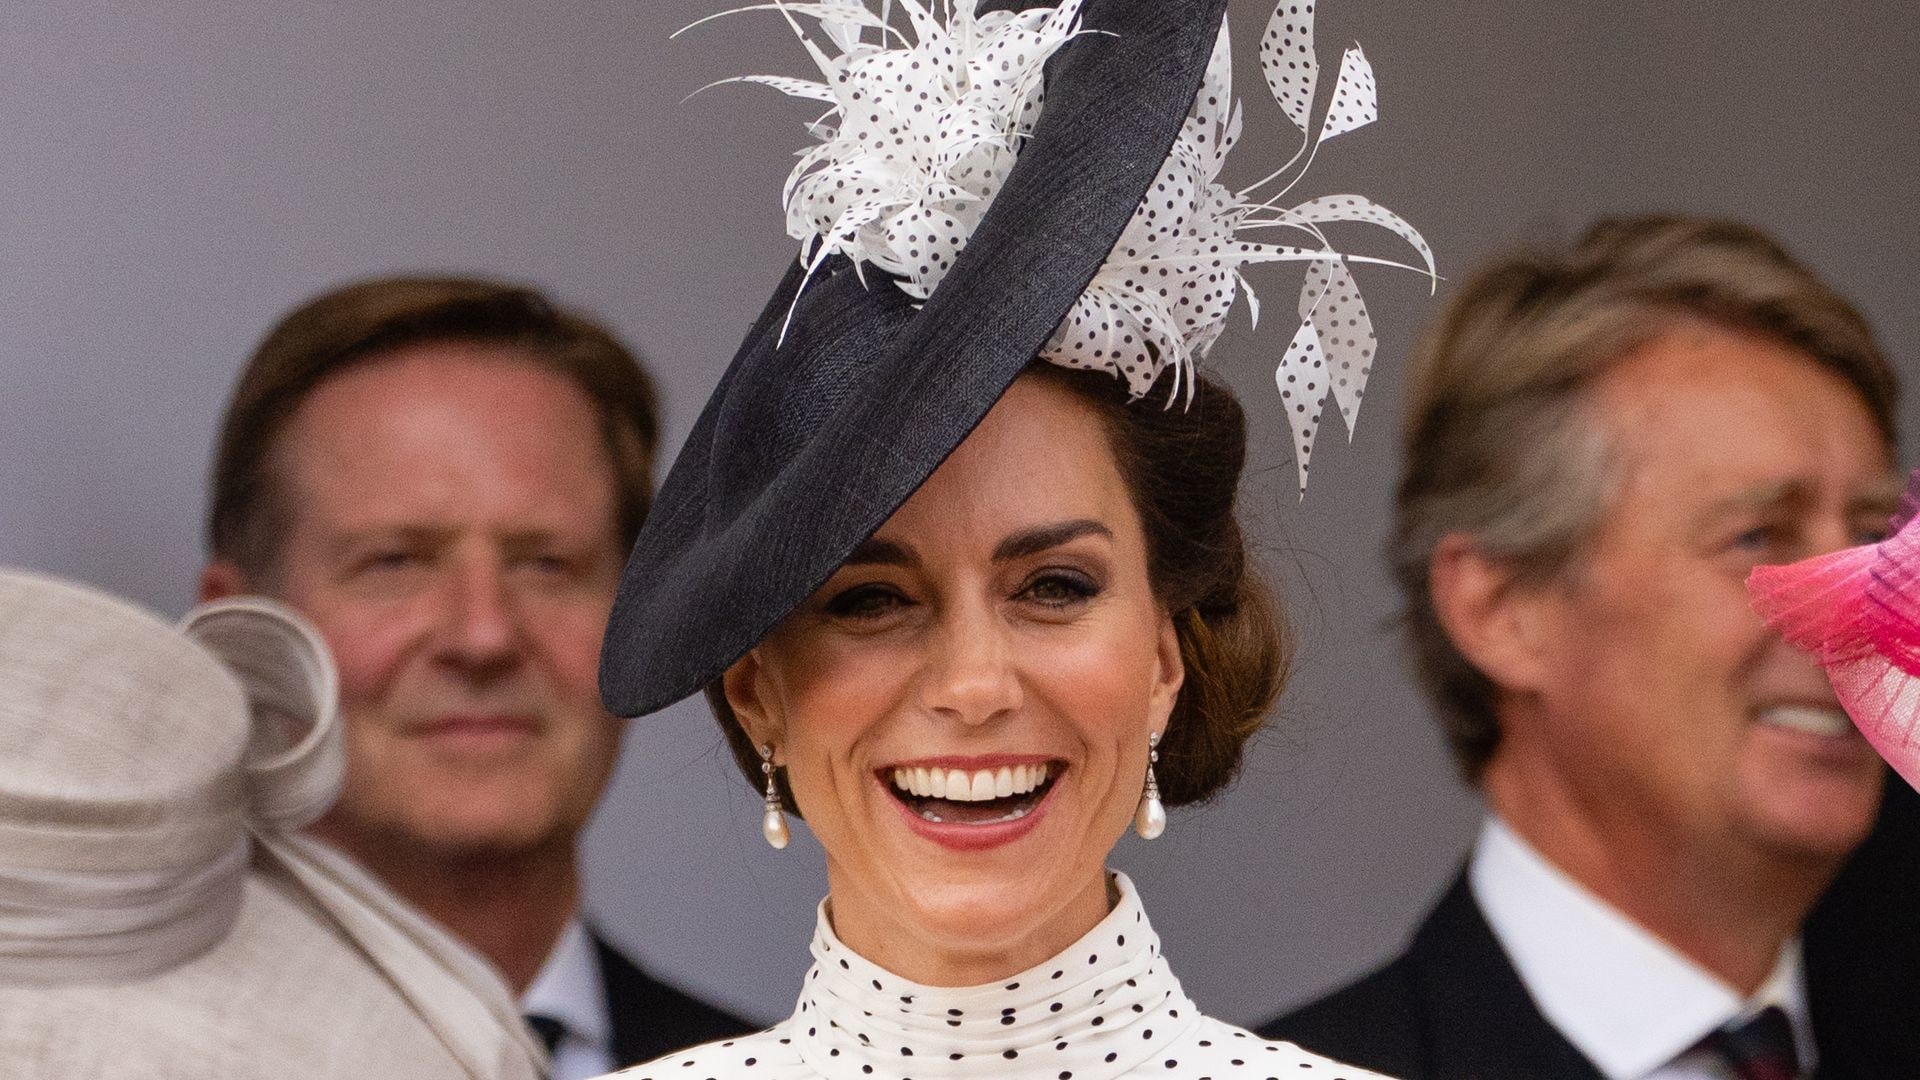 Kate Middleton is all smiles at the Order of the Garter Ceremony